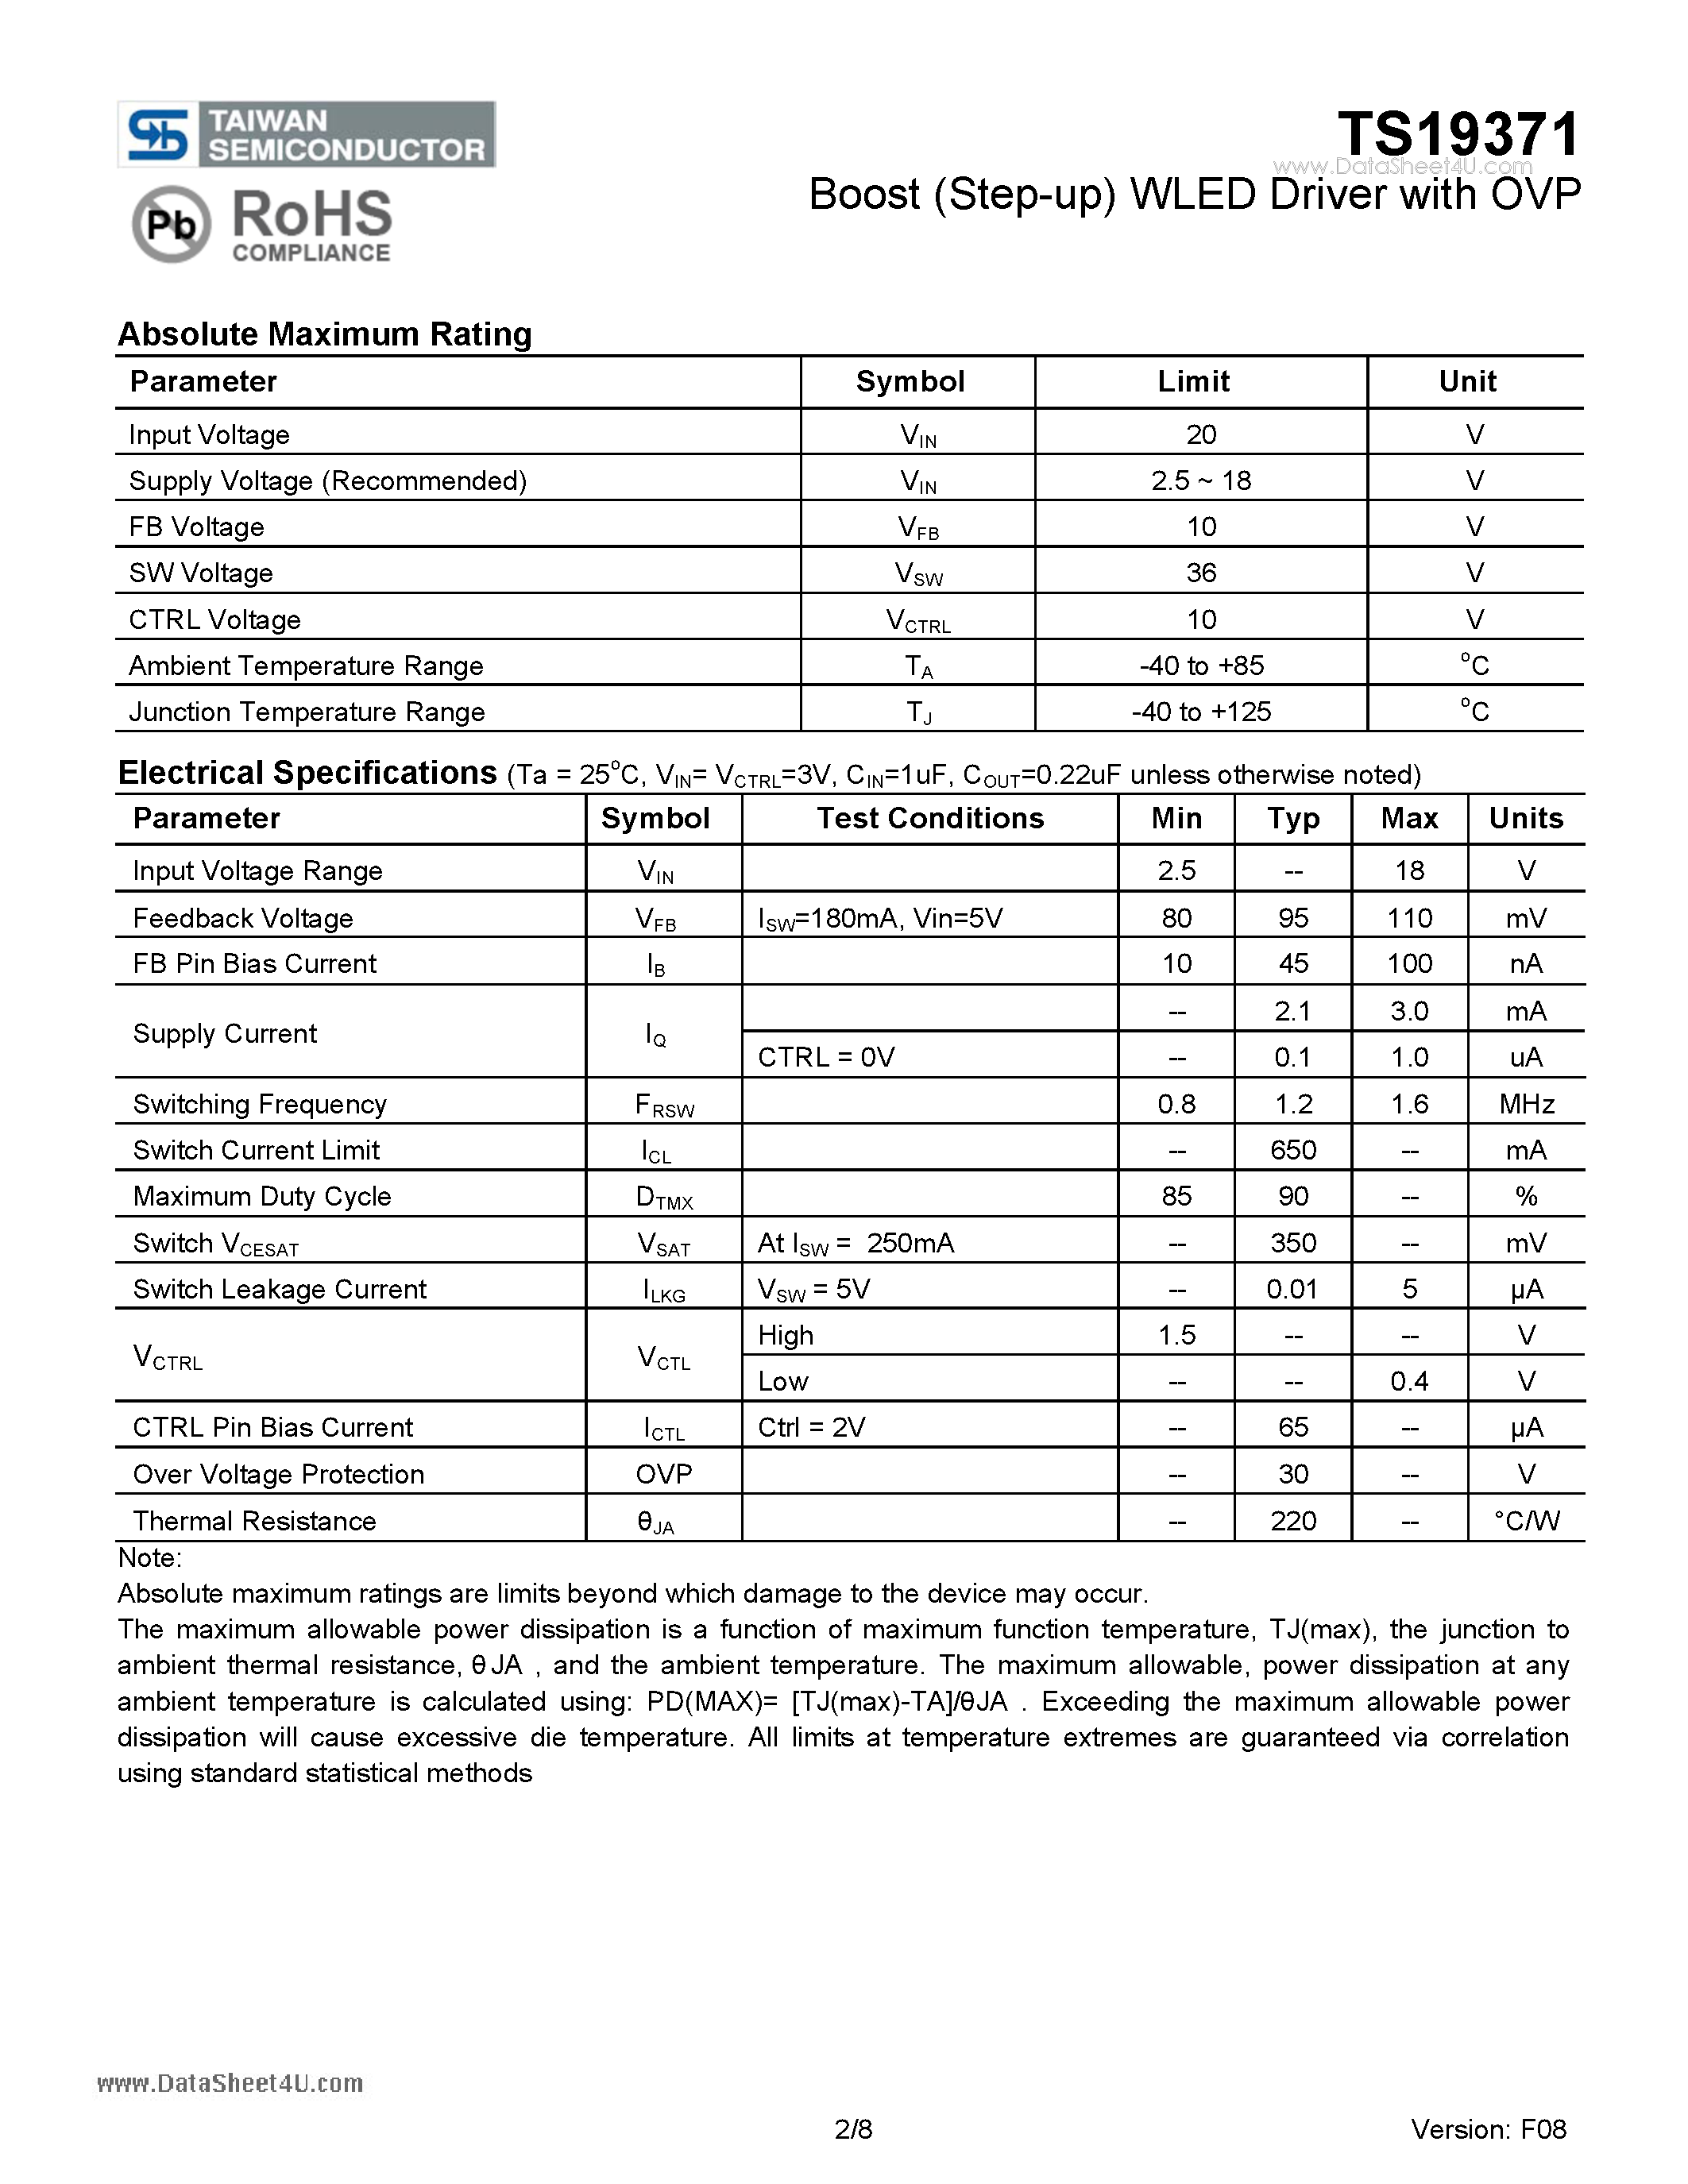 Datasheet TS19371 - Boost (Step-up) WLED Driver page 2